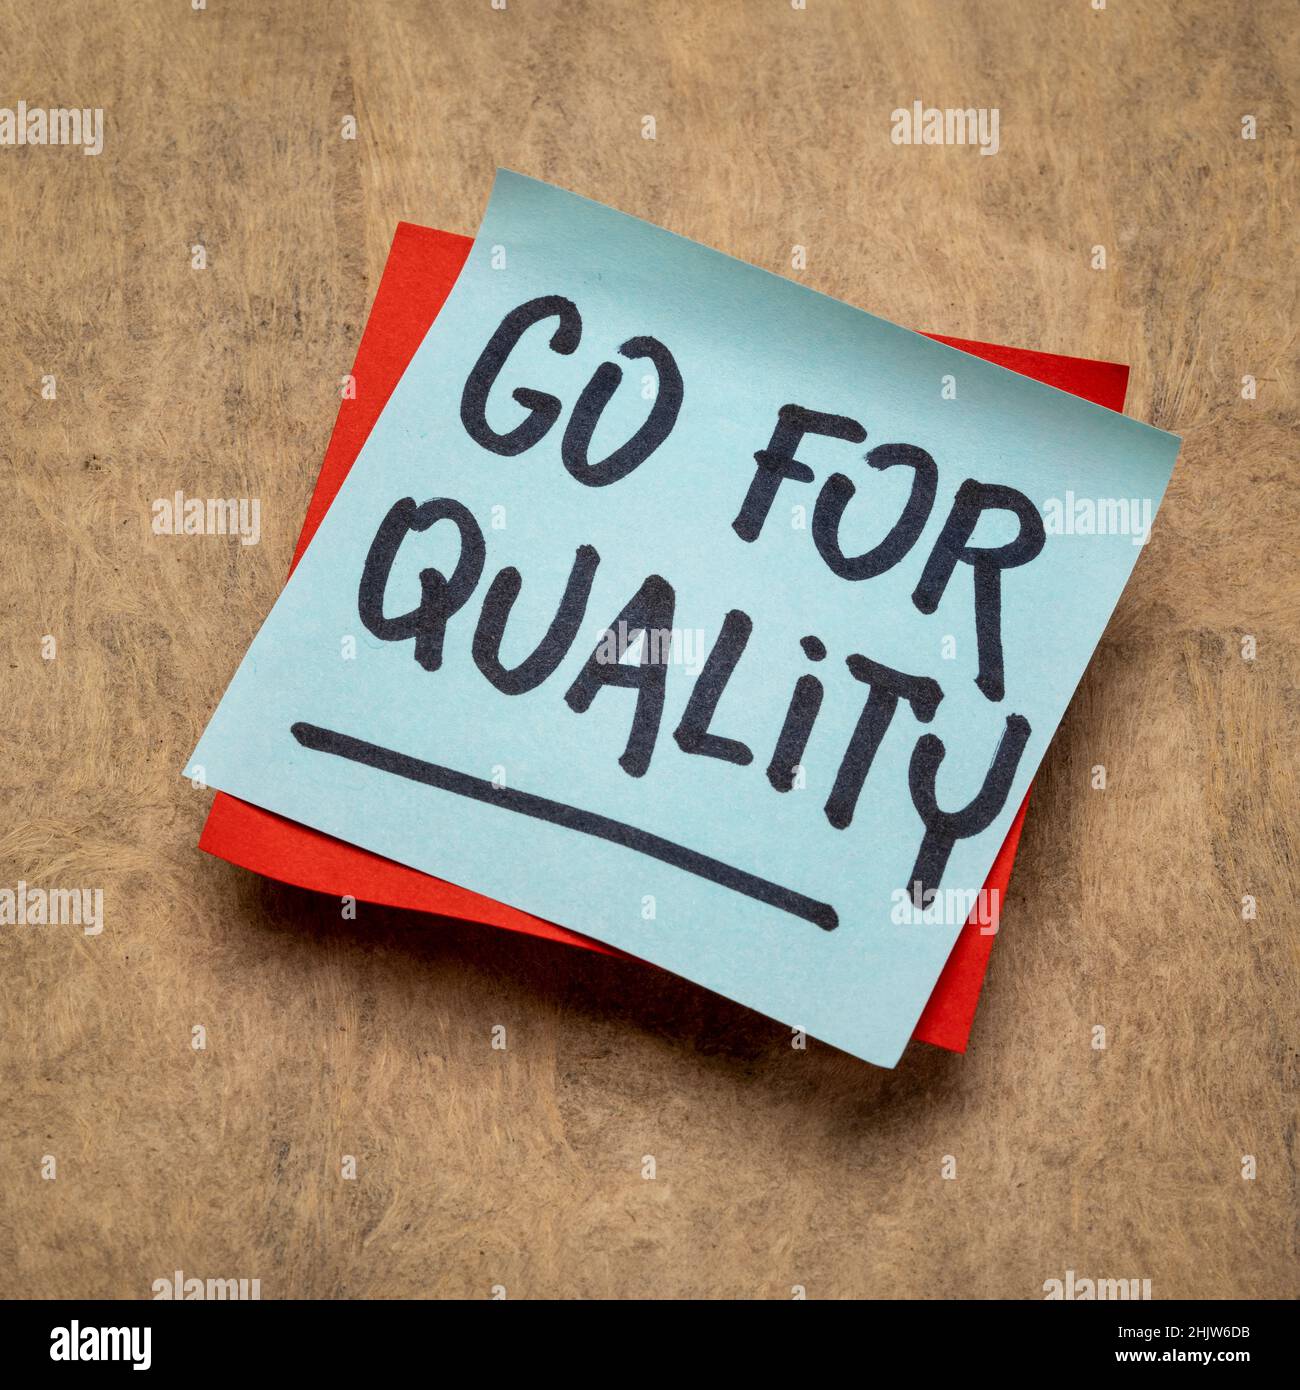 go for quality reminder note with, business, lifestyle and personal development concept Stock Photo